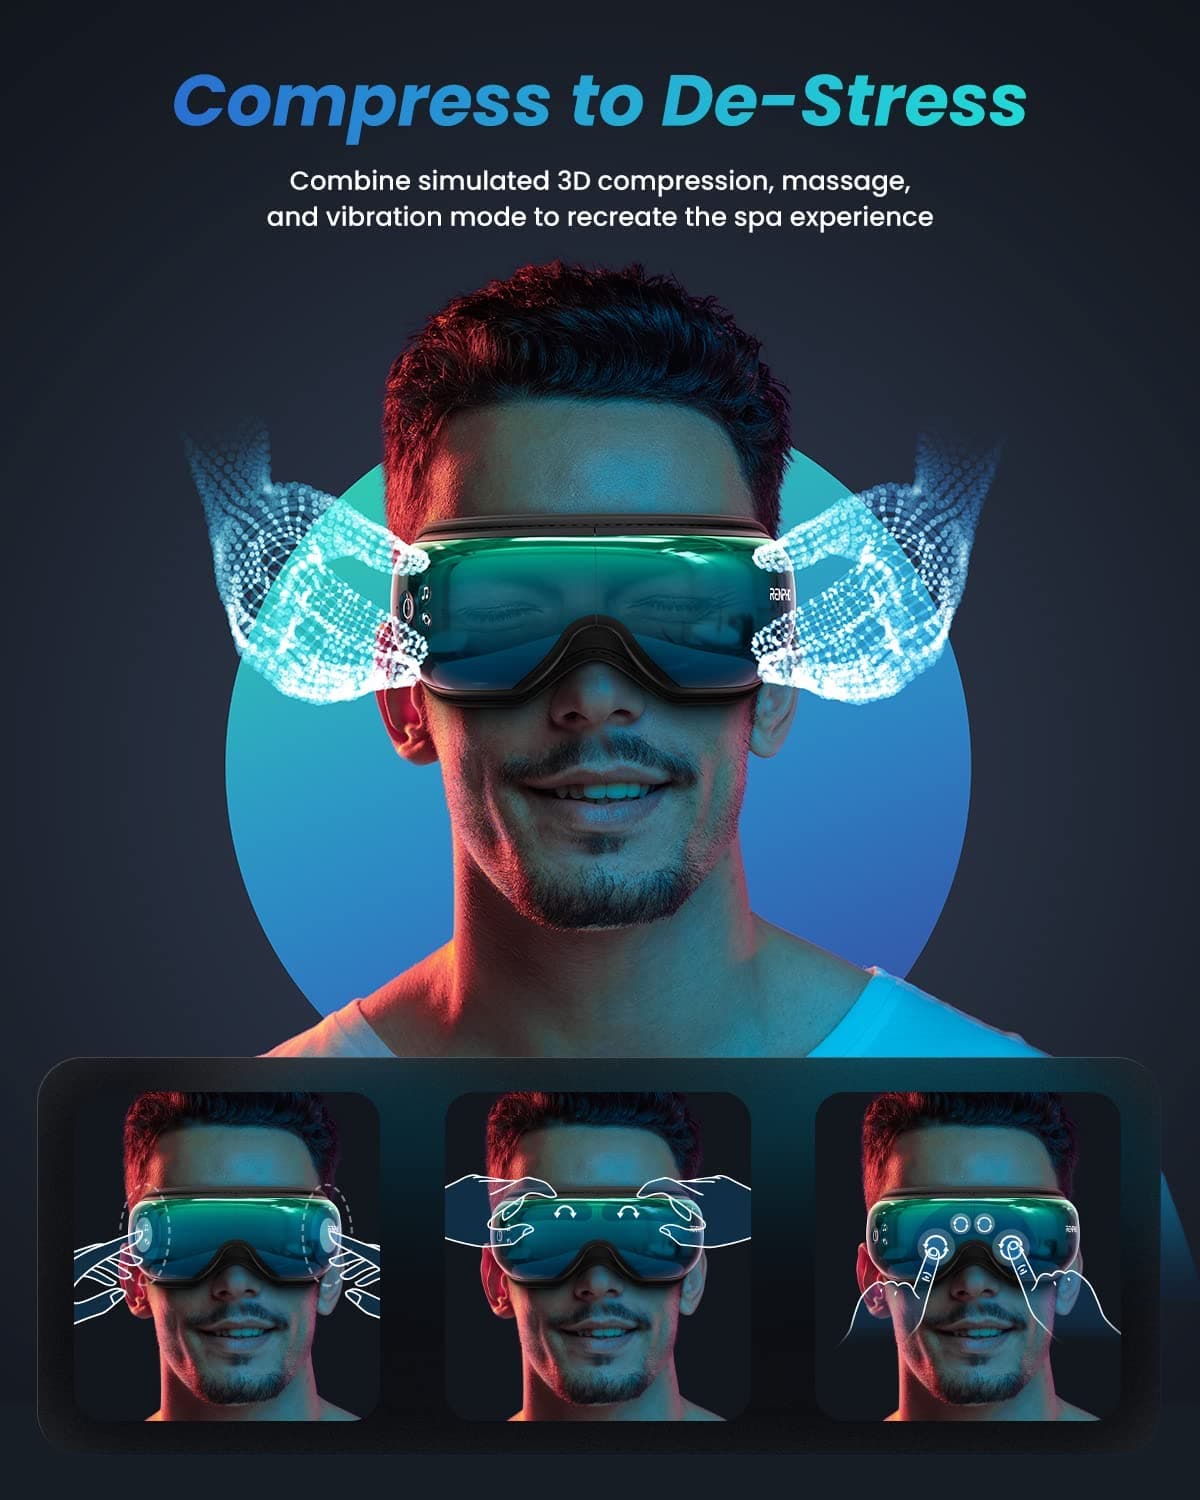 A man wearing the Renpho EU Eyeris 1 Eye Massager in Sliver Teal with glowing edges and digital wings on the sides, designed specifically as an eye massager for migraine relief. Below are four smaller images showing different functions of the mask.